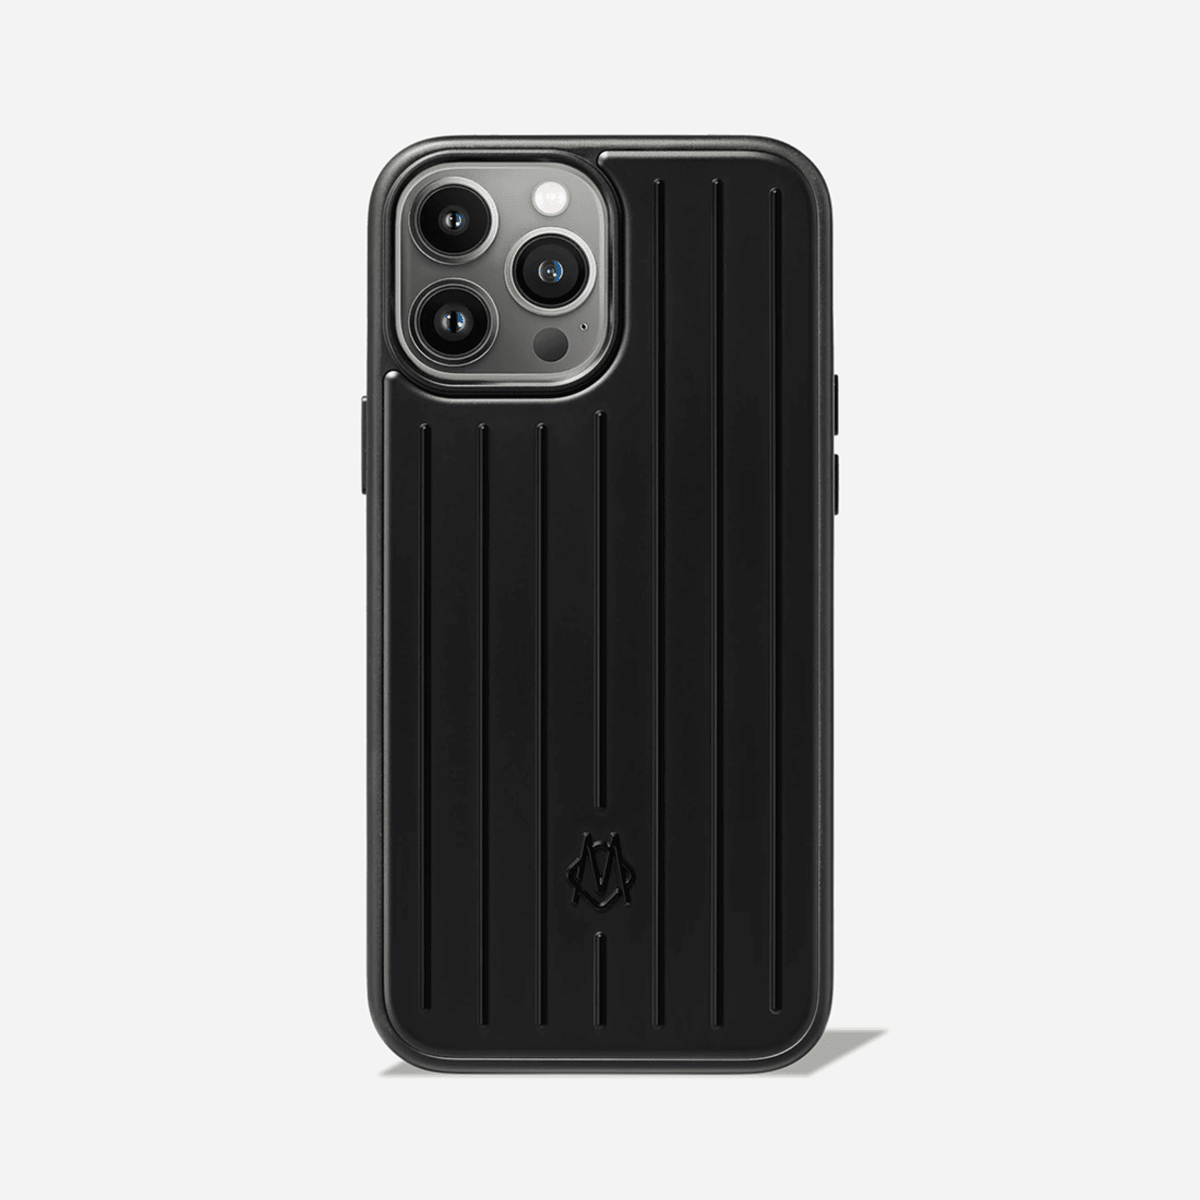 RIMOWA Releases Its First Case for the iPhone 13 Pro Max - Airows